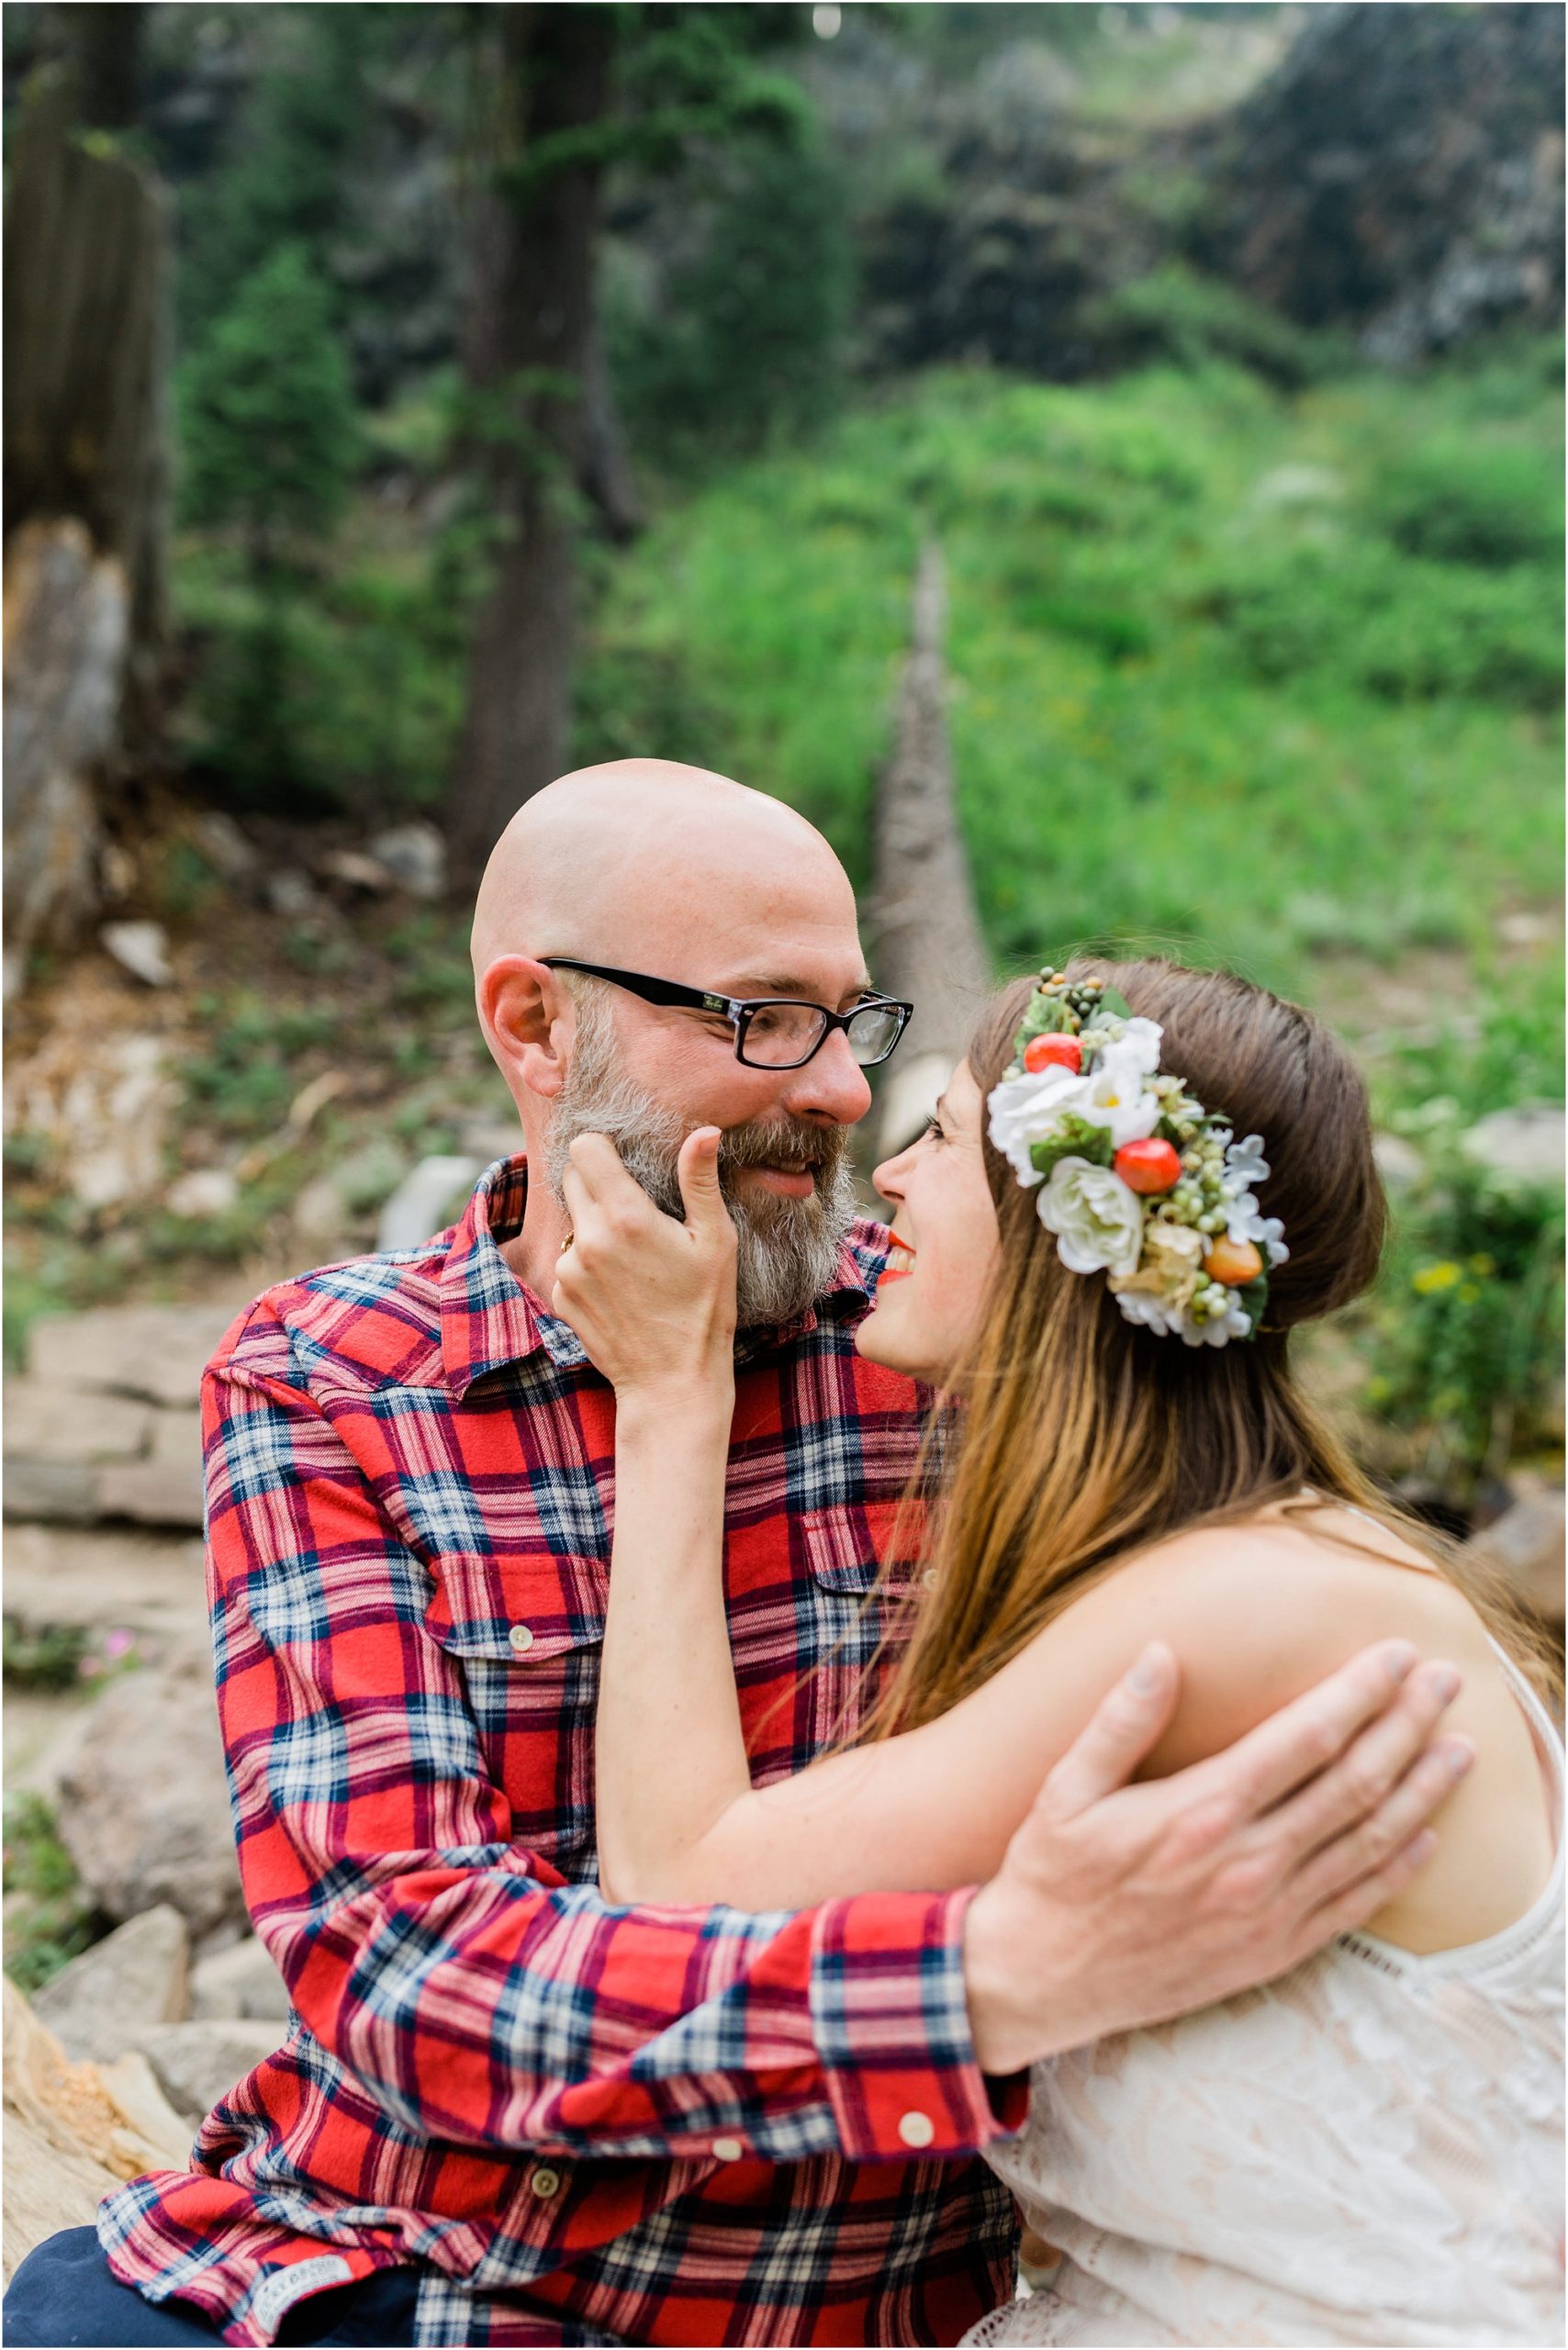 The bride looks adoringly into her husband's eye's as she grabs his beard after they said their wedding vows at Crater Lake in Oregon. | Erica Swantek Photography